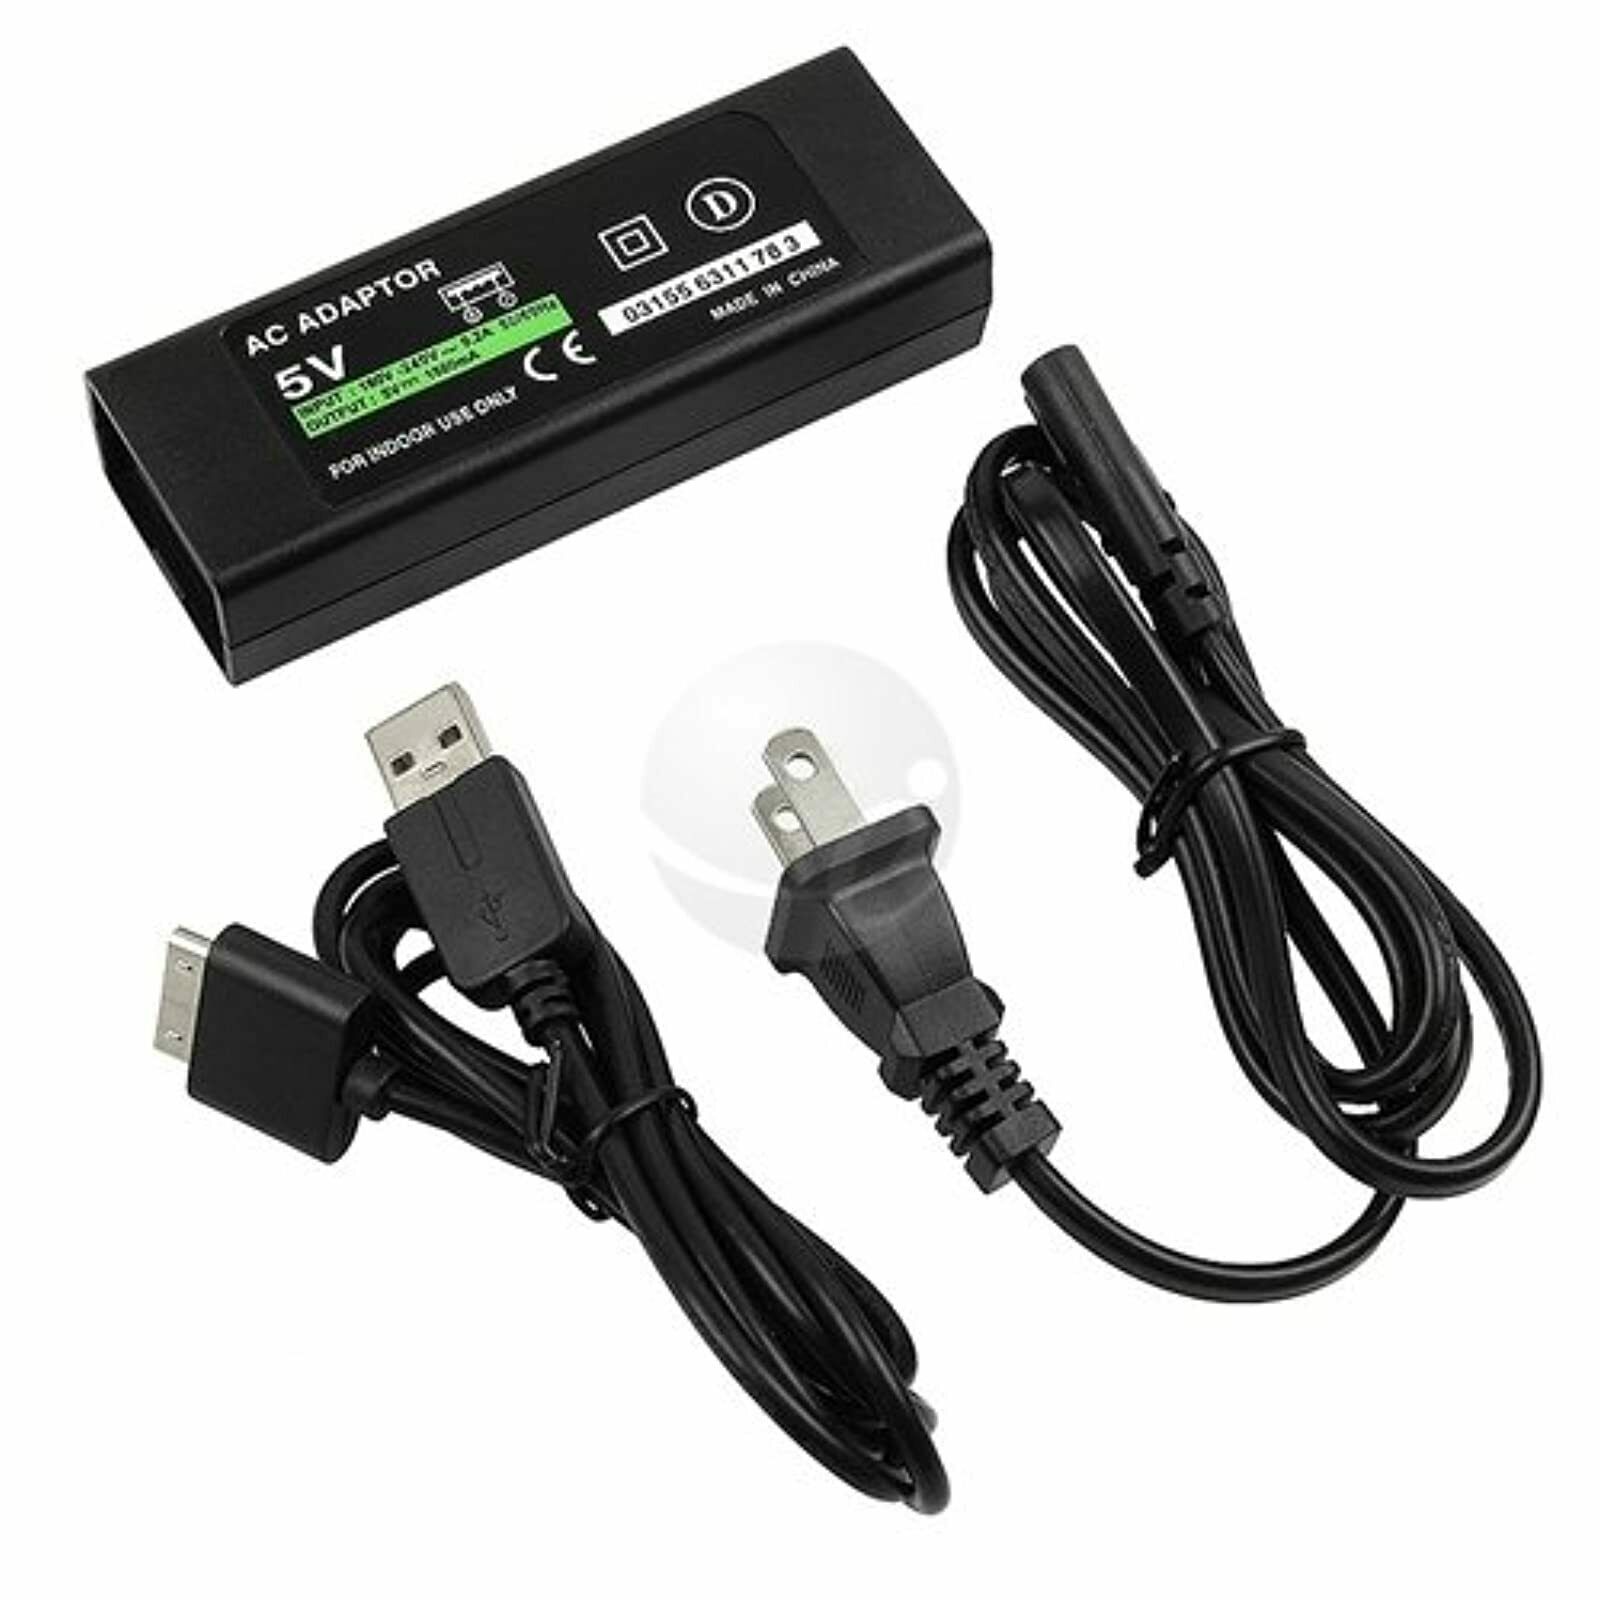 AC Adapter Power Wall Home Charger Cable For PSP Go UMD Go MPN VF-76-PSP-0011-US-02 Type Power Adapter Platform Sony P - Click Image to Close